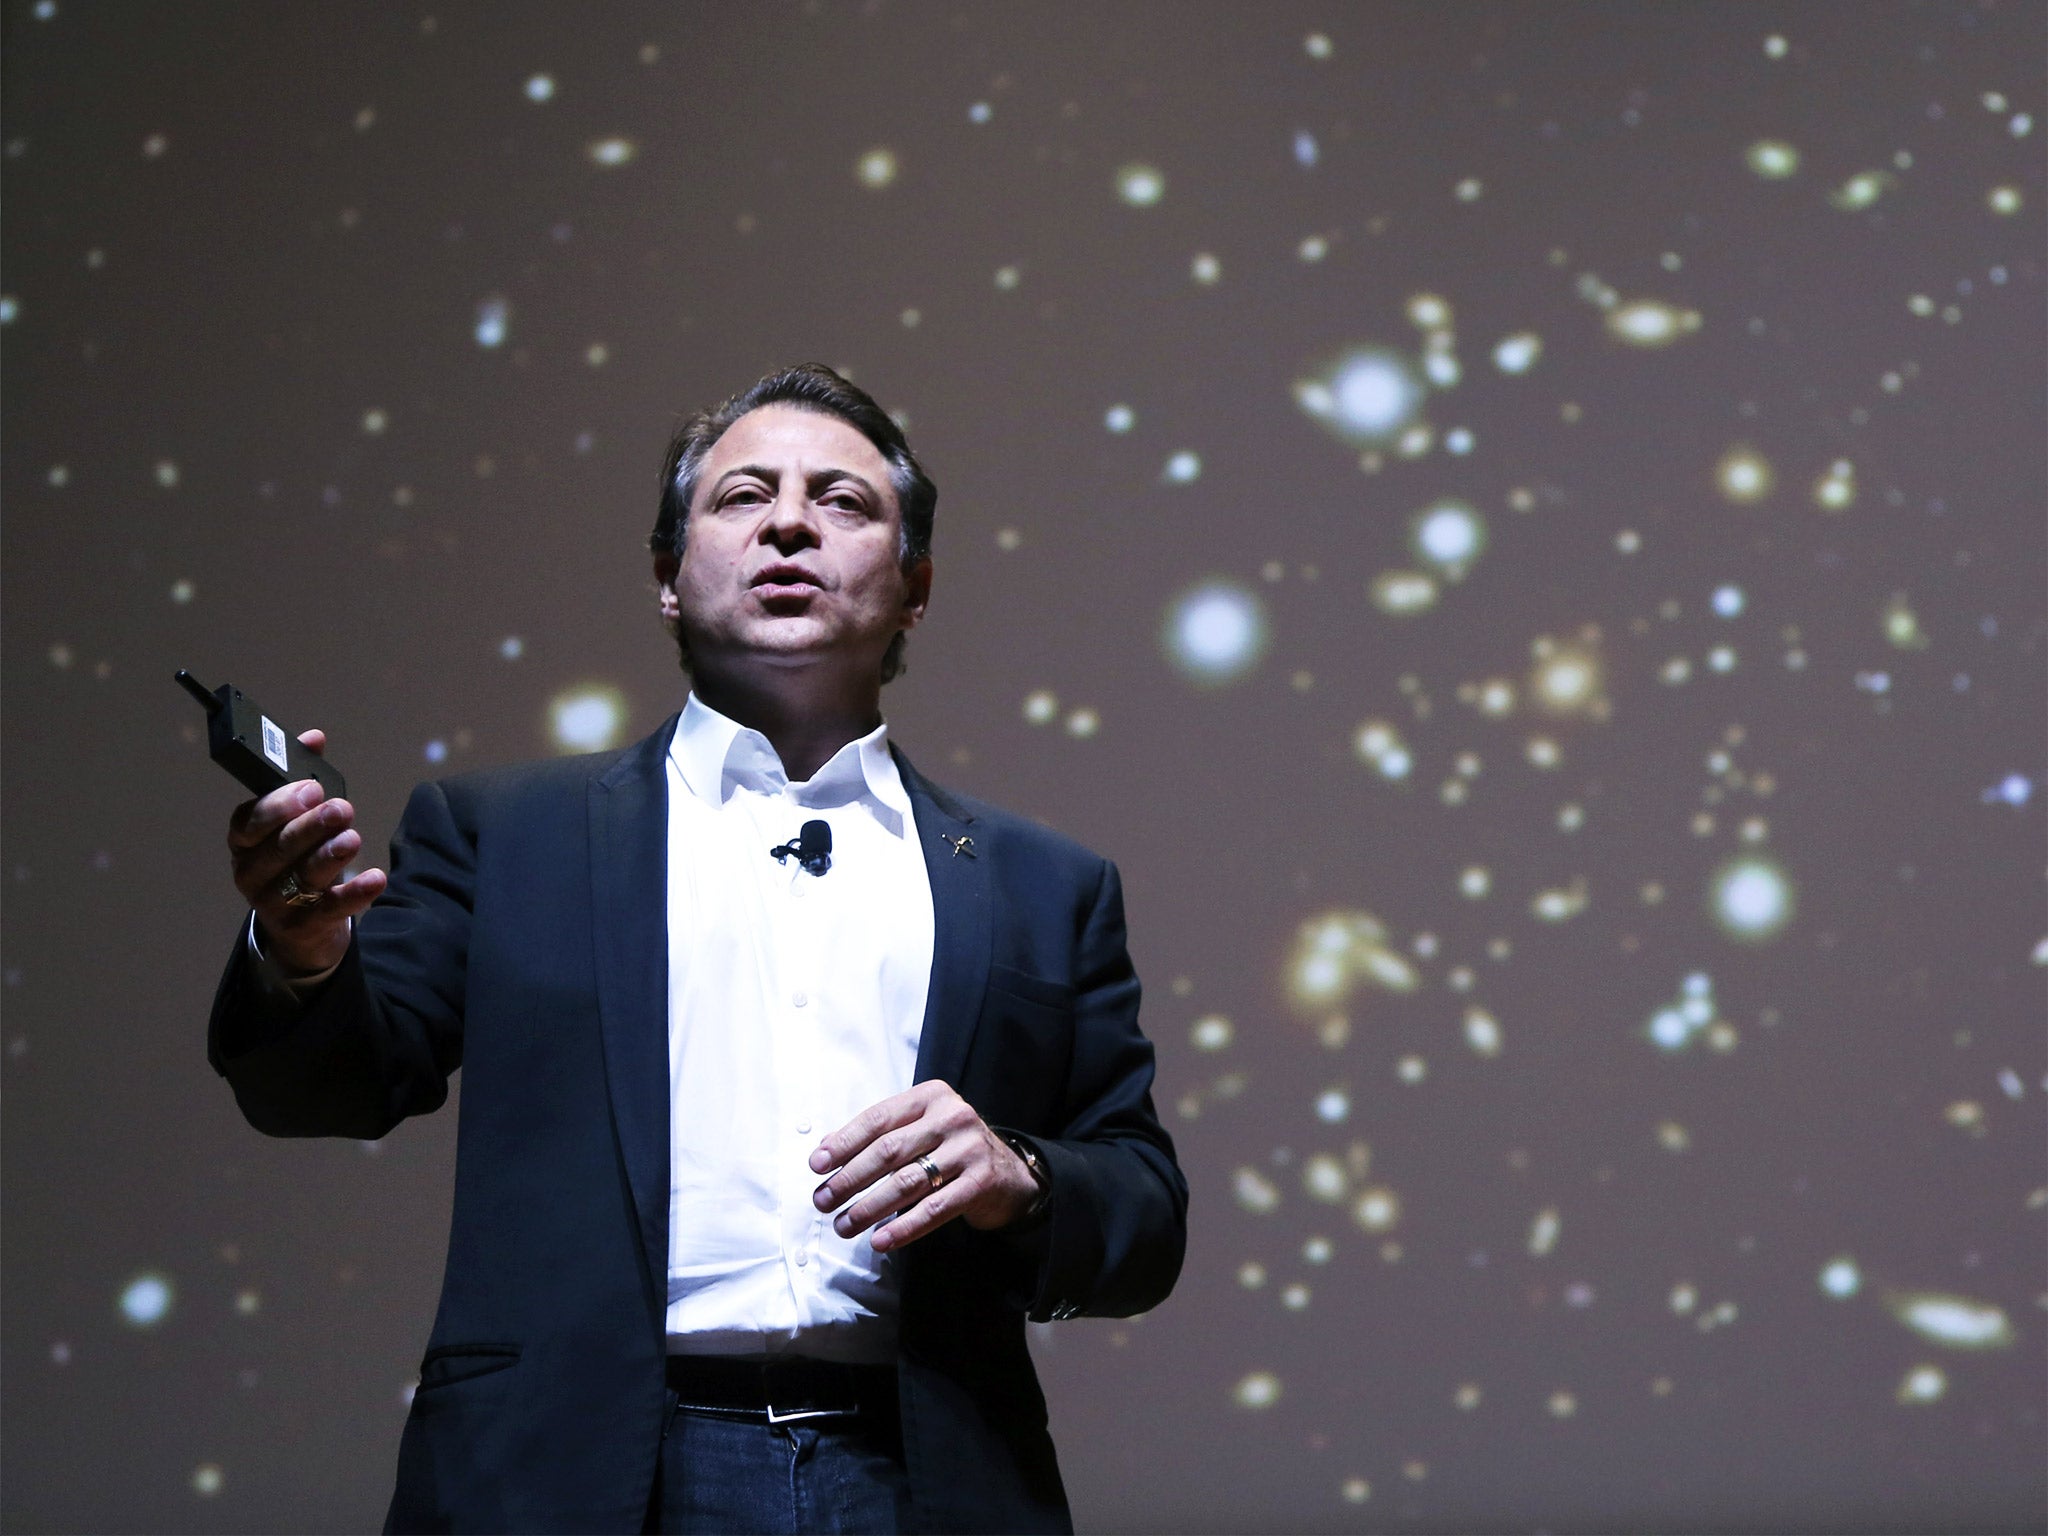 Peter Diamandis wants to mine asteroids for construction metals, rocket fuel and strategic metals such as platinum